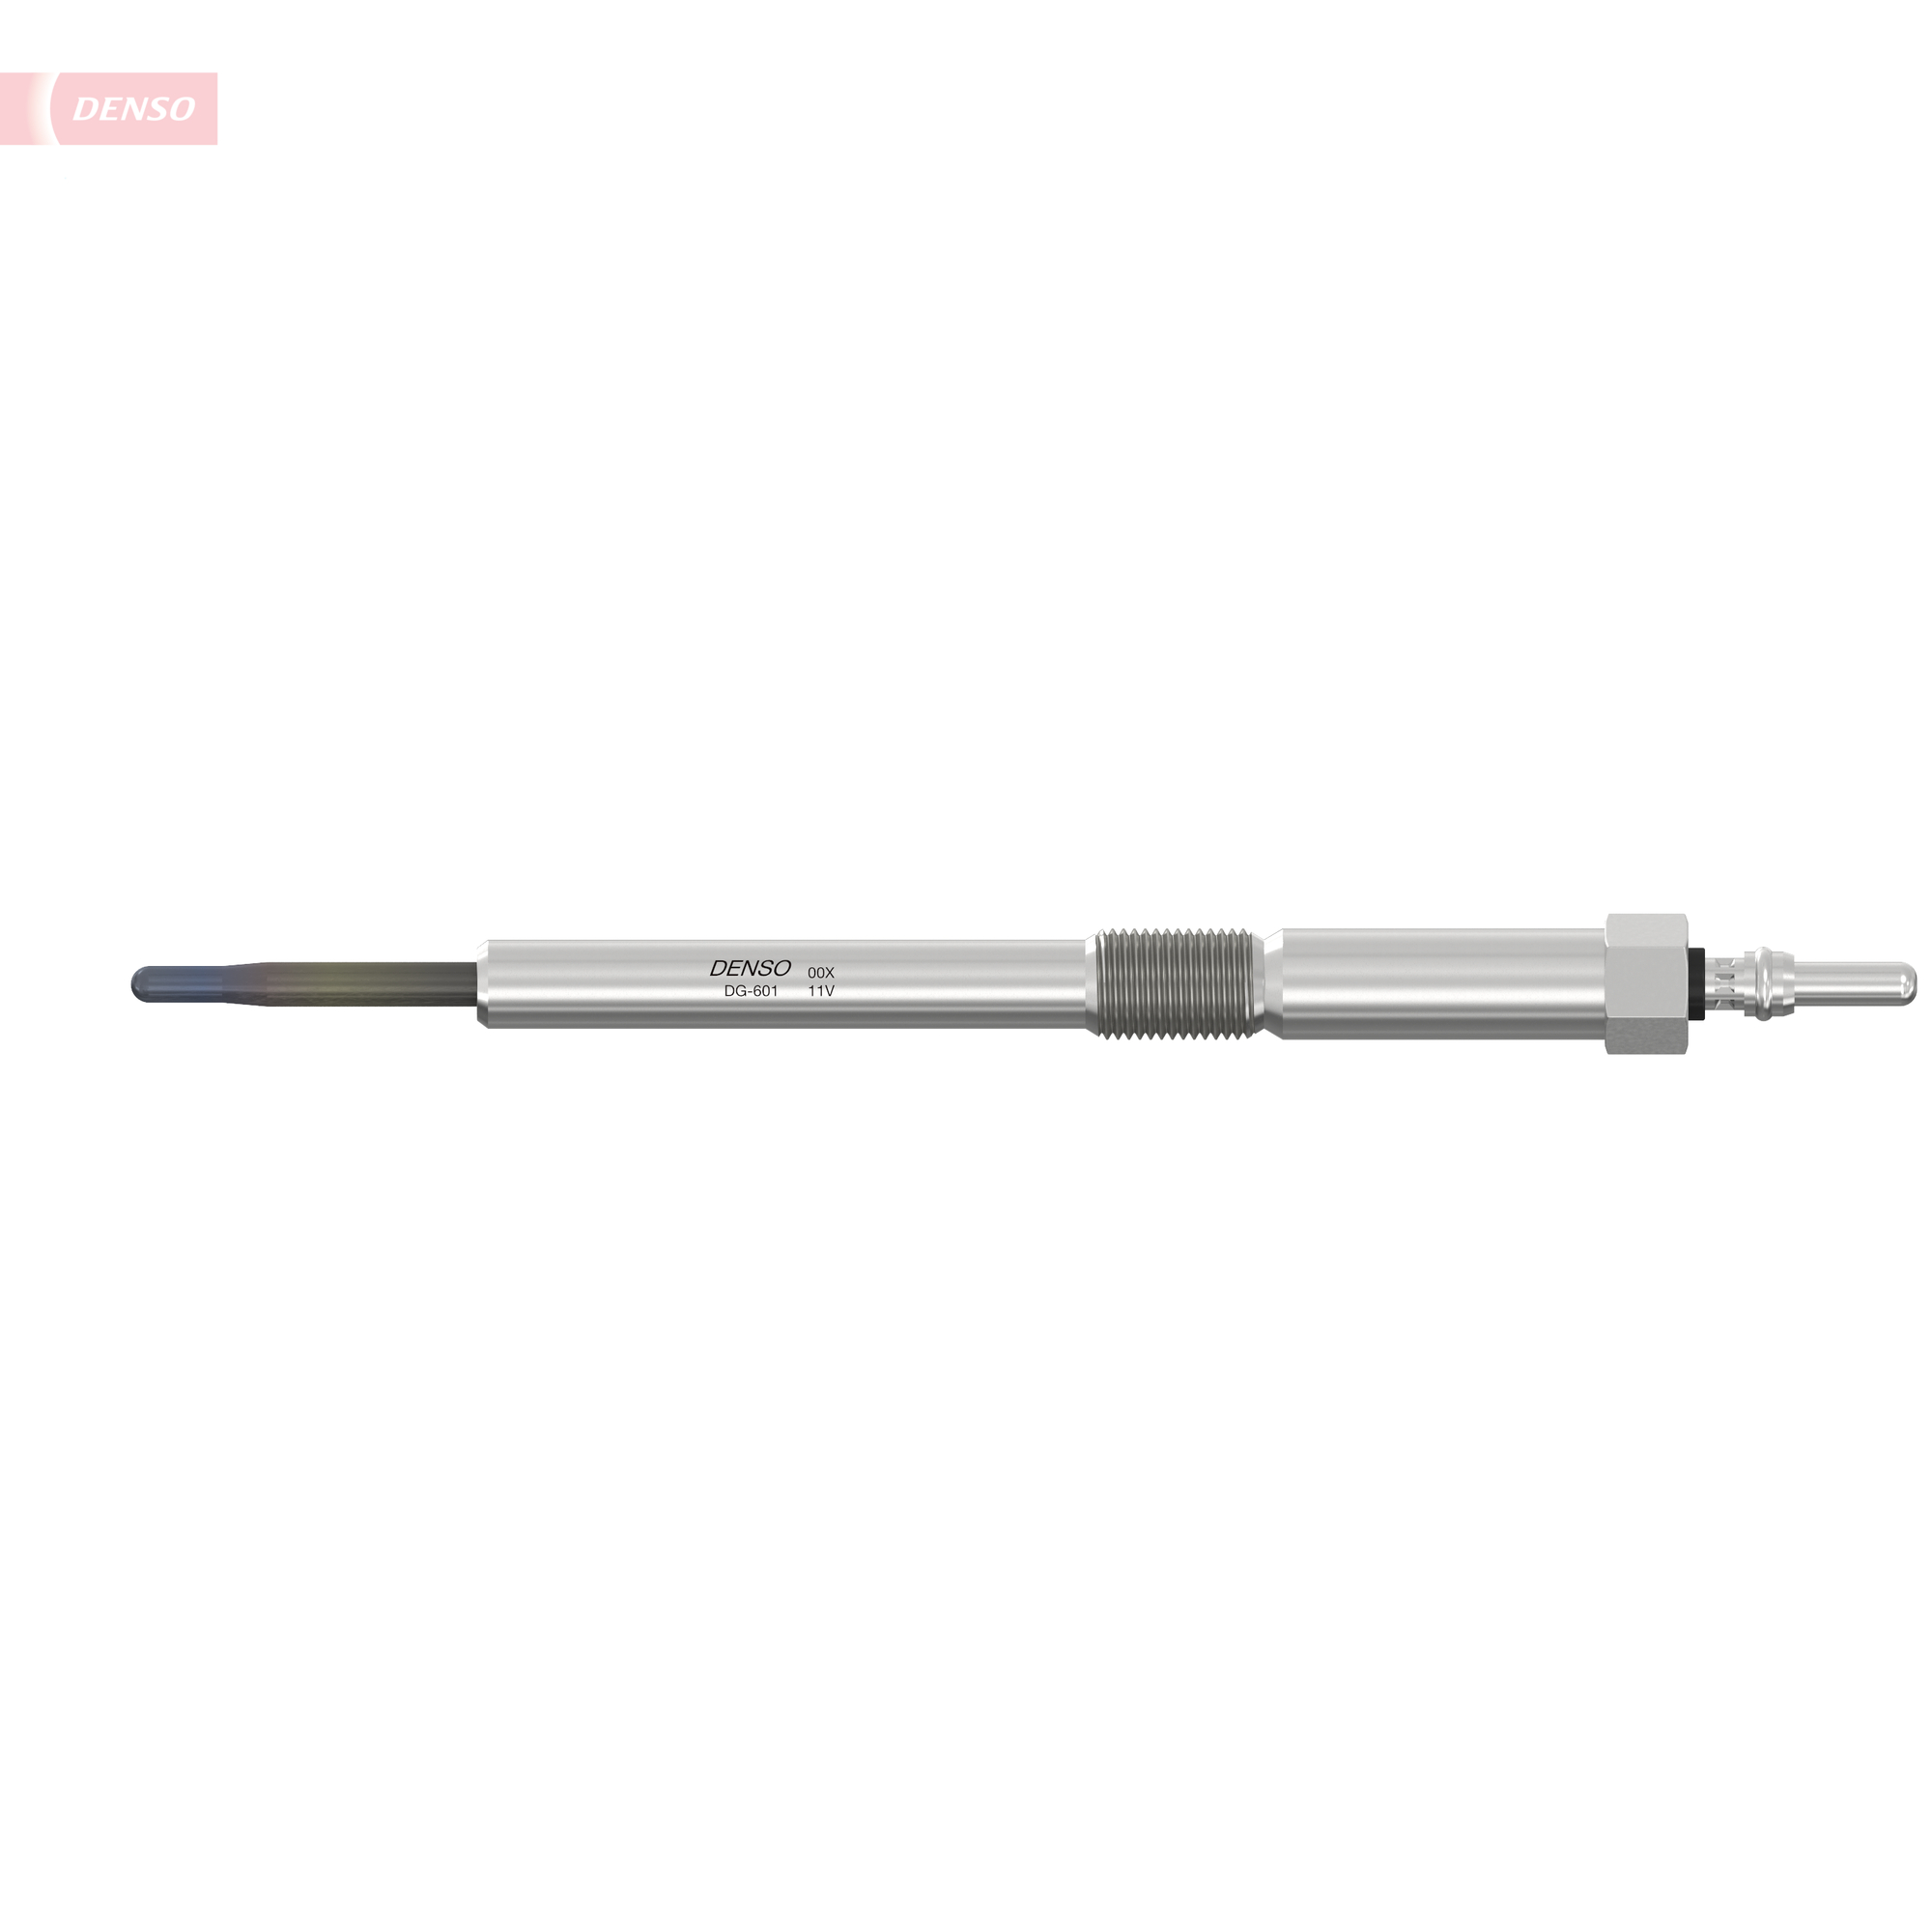 Picture of DENSO - DG-601 - Glow Plug (Glow Ignition System)